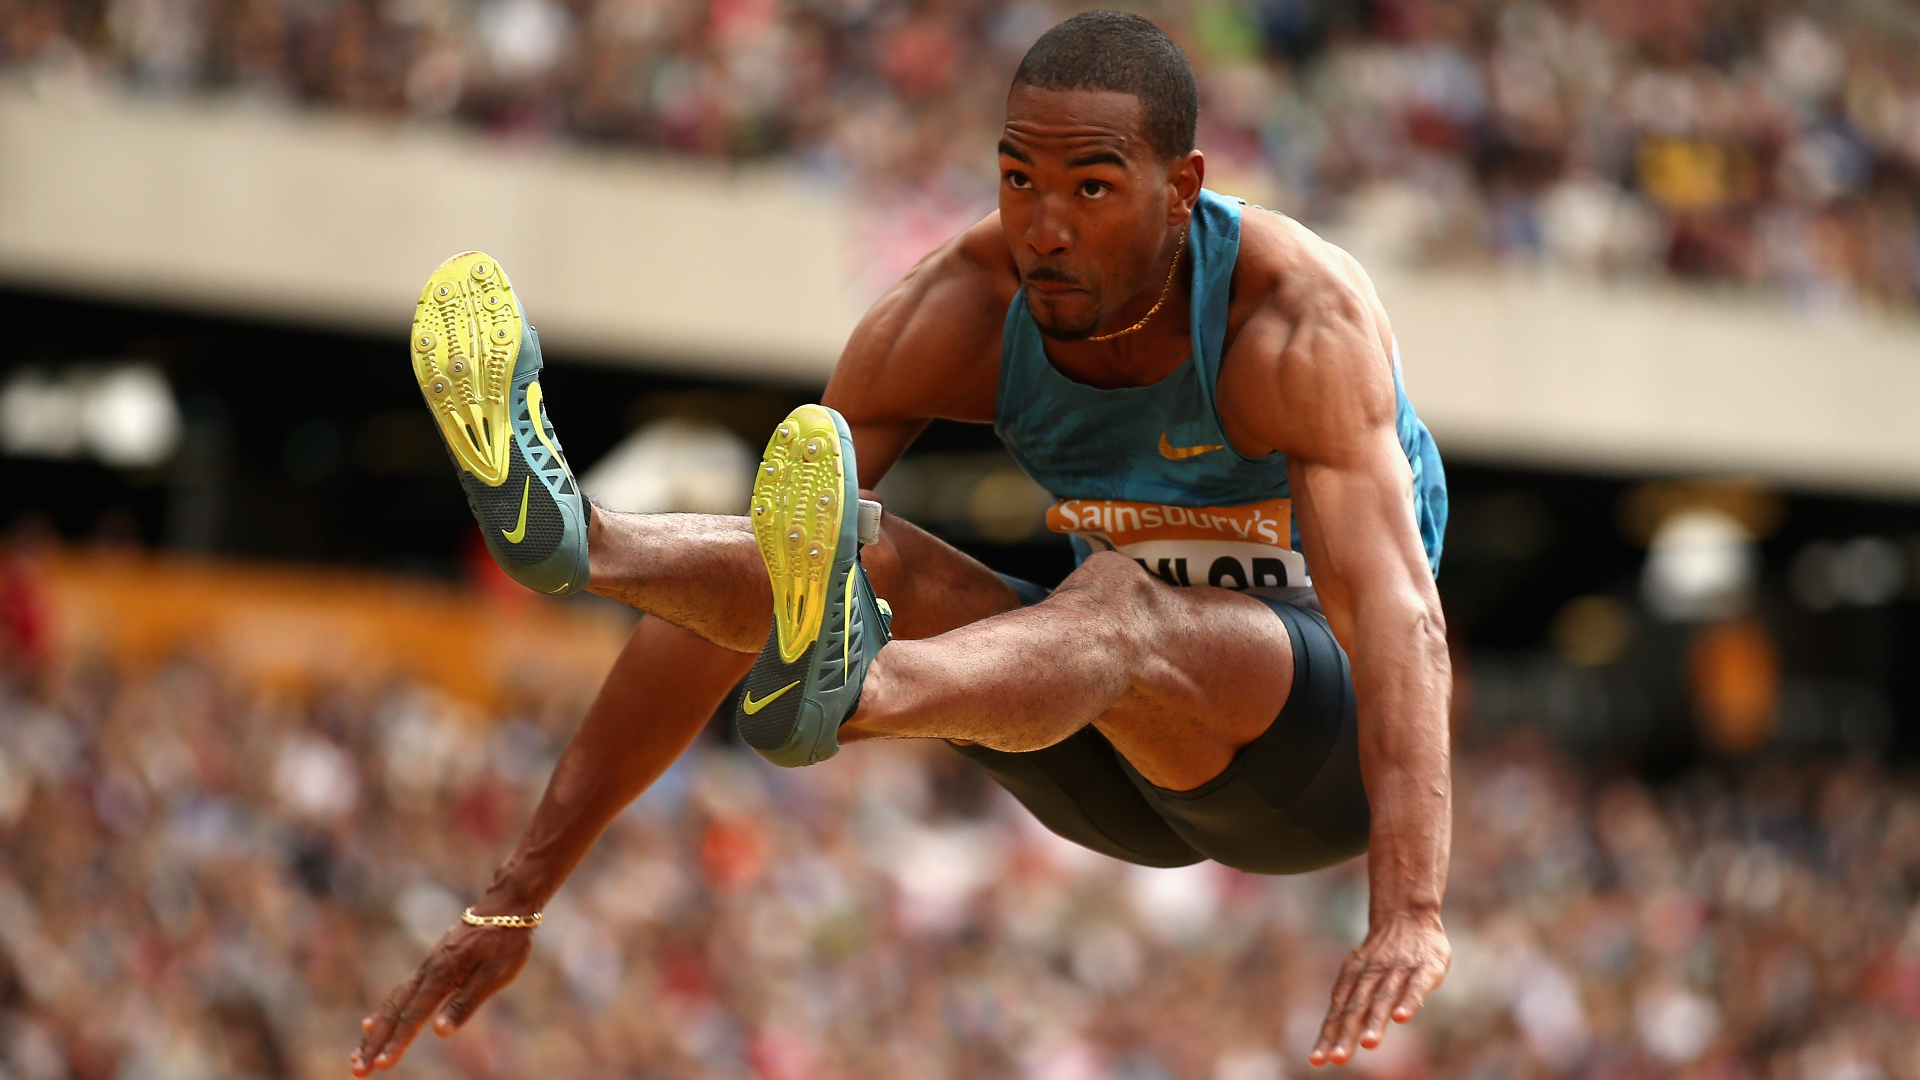 11Alive Anchor Cheryl Preheim recently caught up with the 2012 and 2016 Olympic triple jump champion ahead of the 2022 World Athletics Championships.